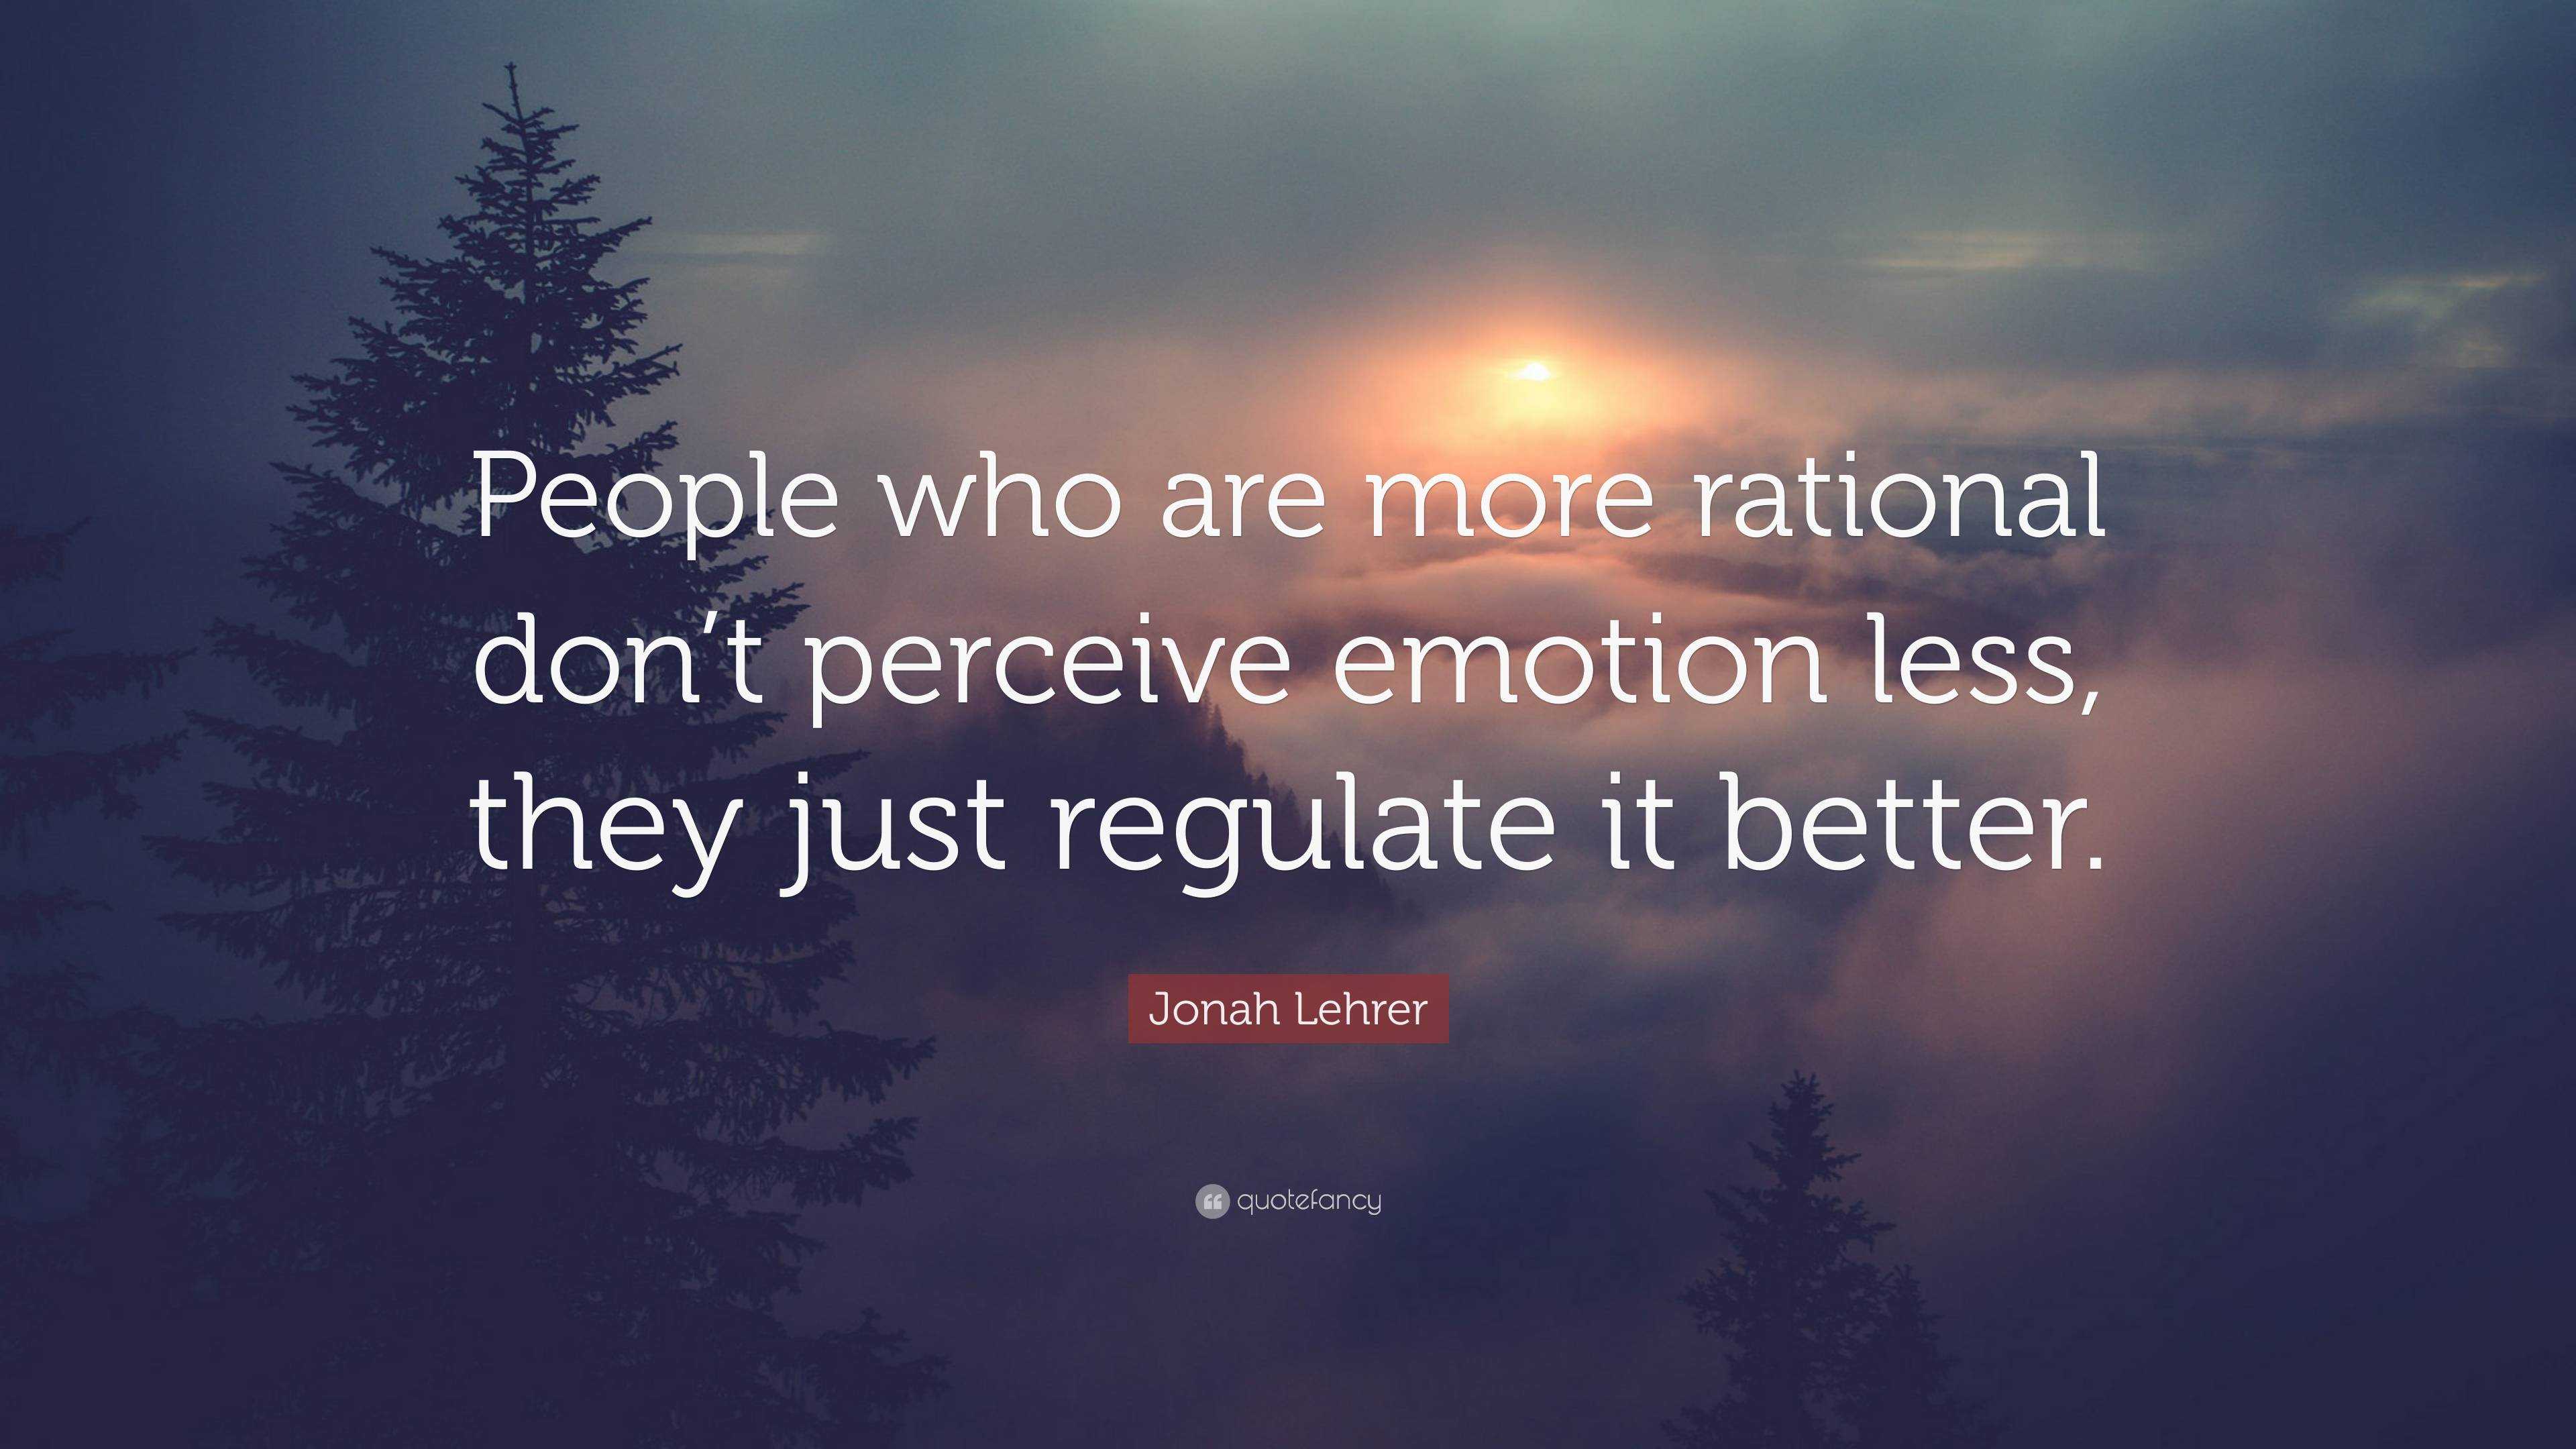 Jonah Lehrer Quote: “People who are more rational don’t perceive ...